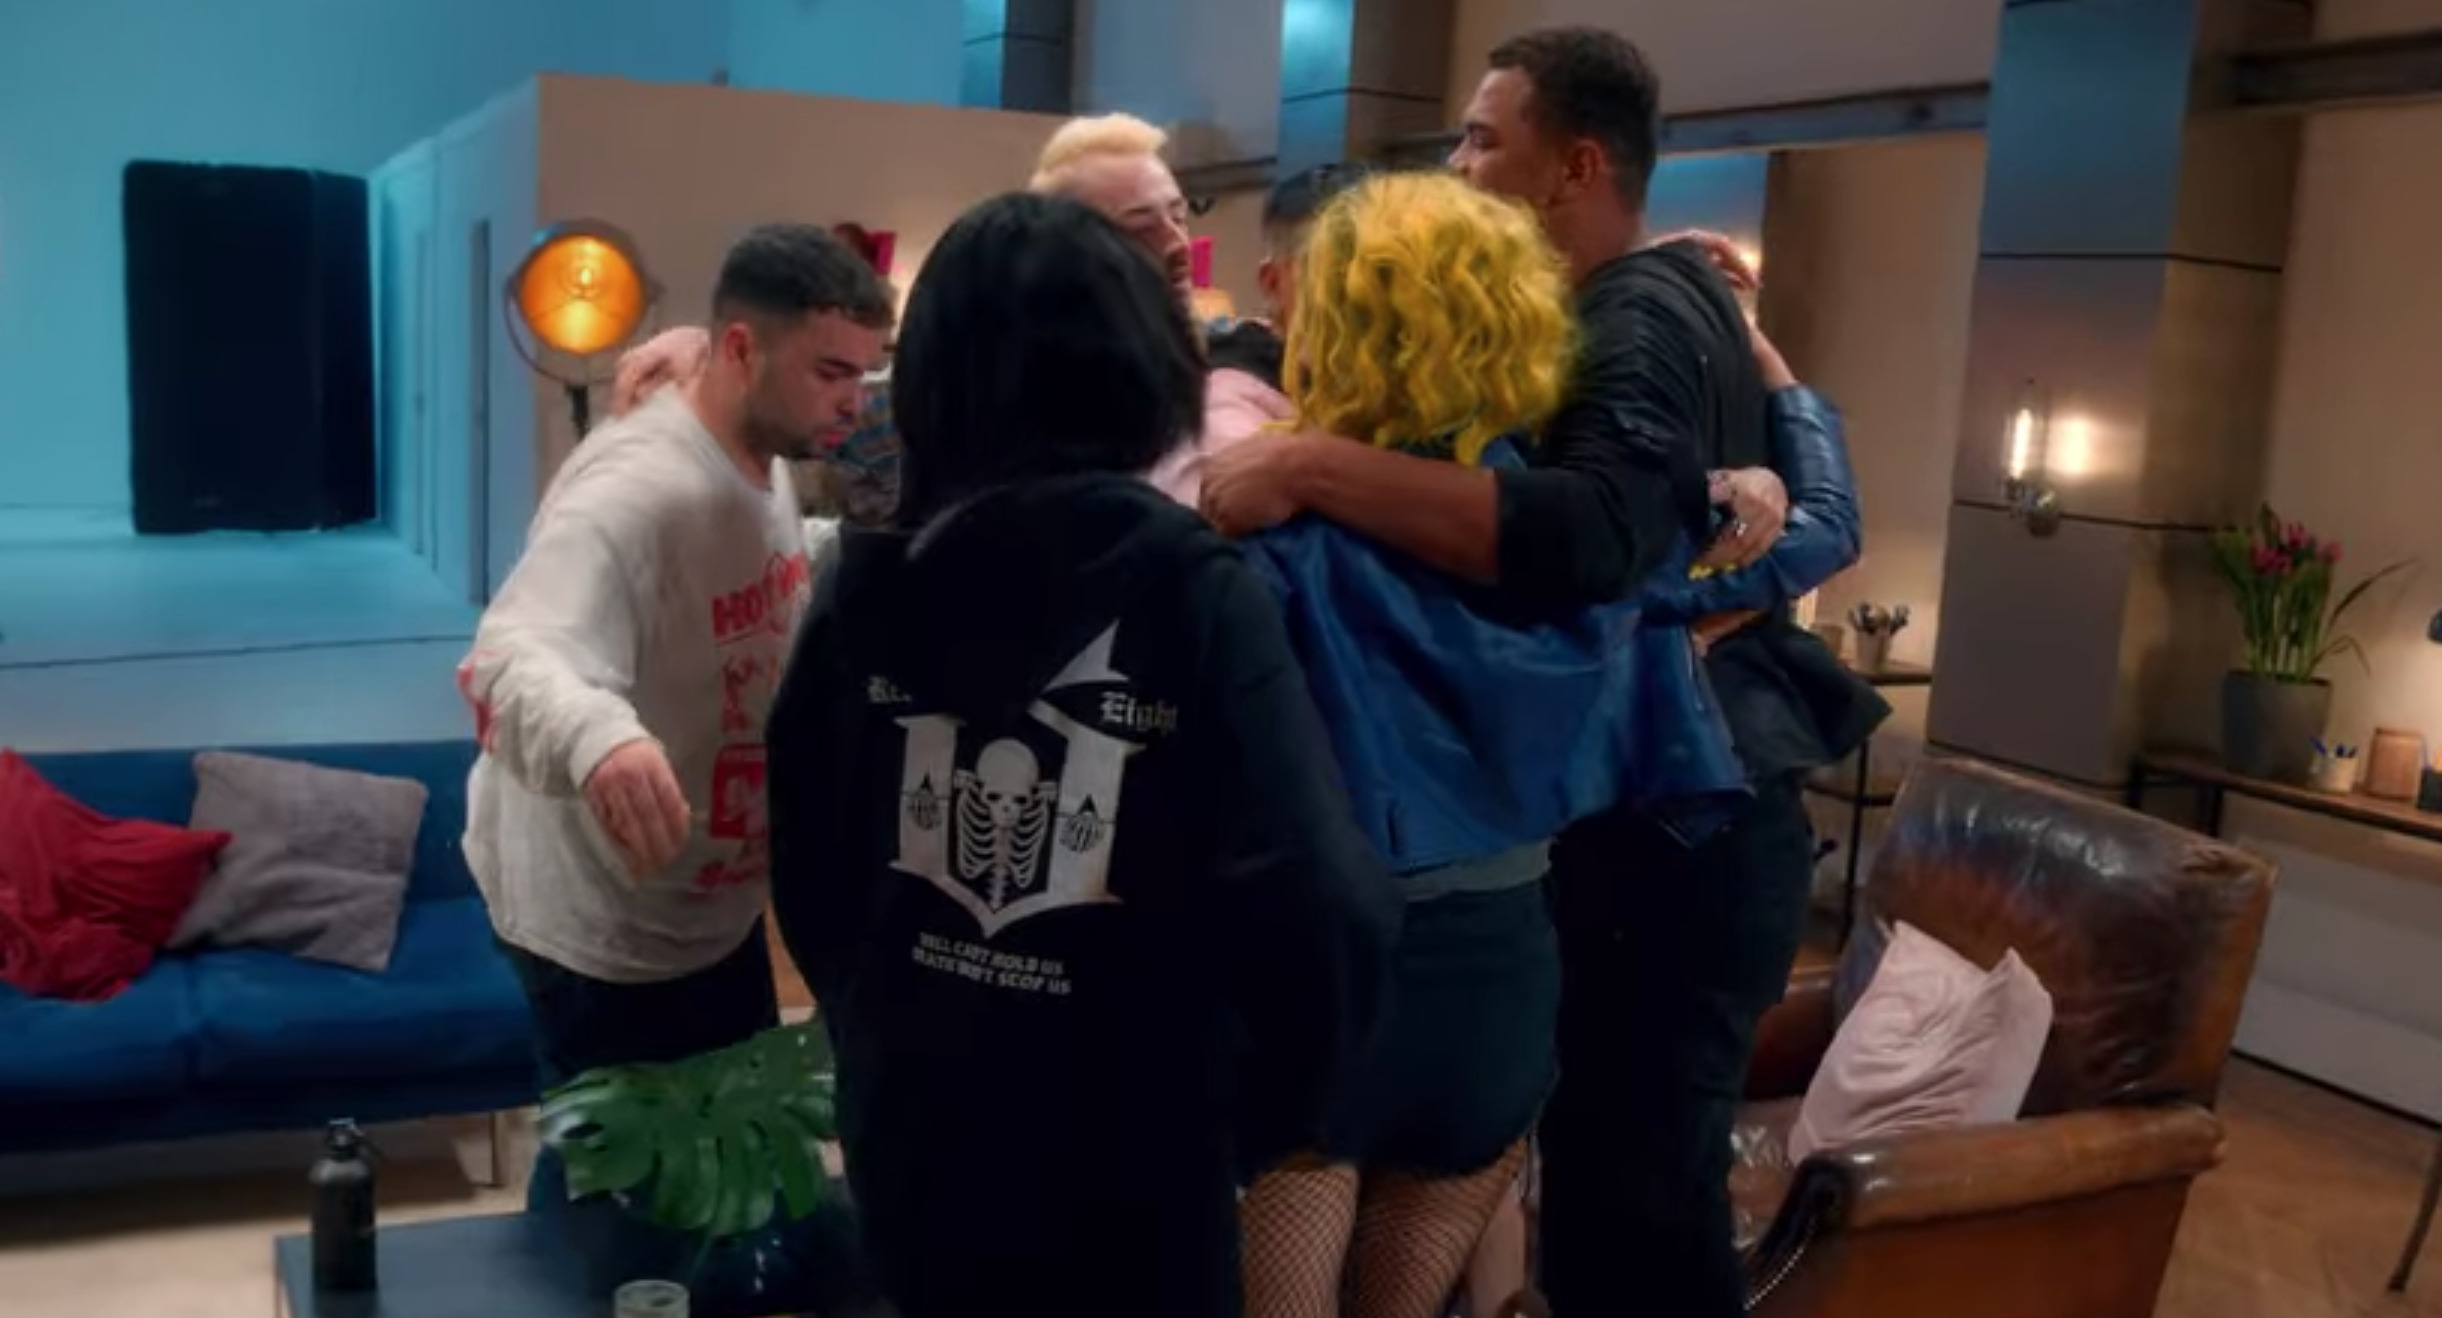 Glow Up contestants come together during the stressful competition.